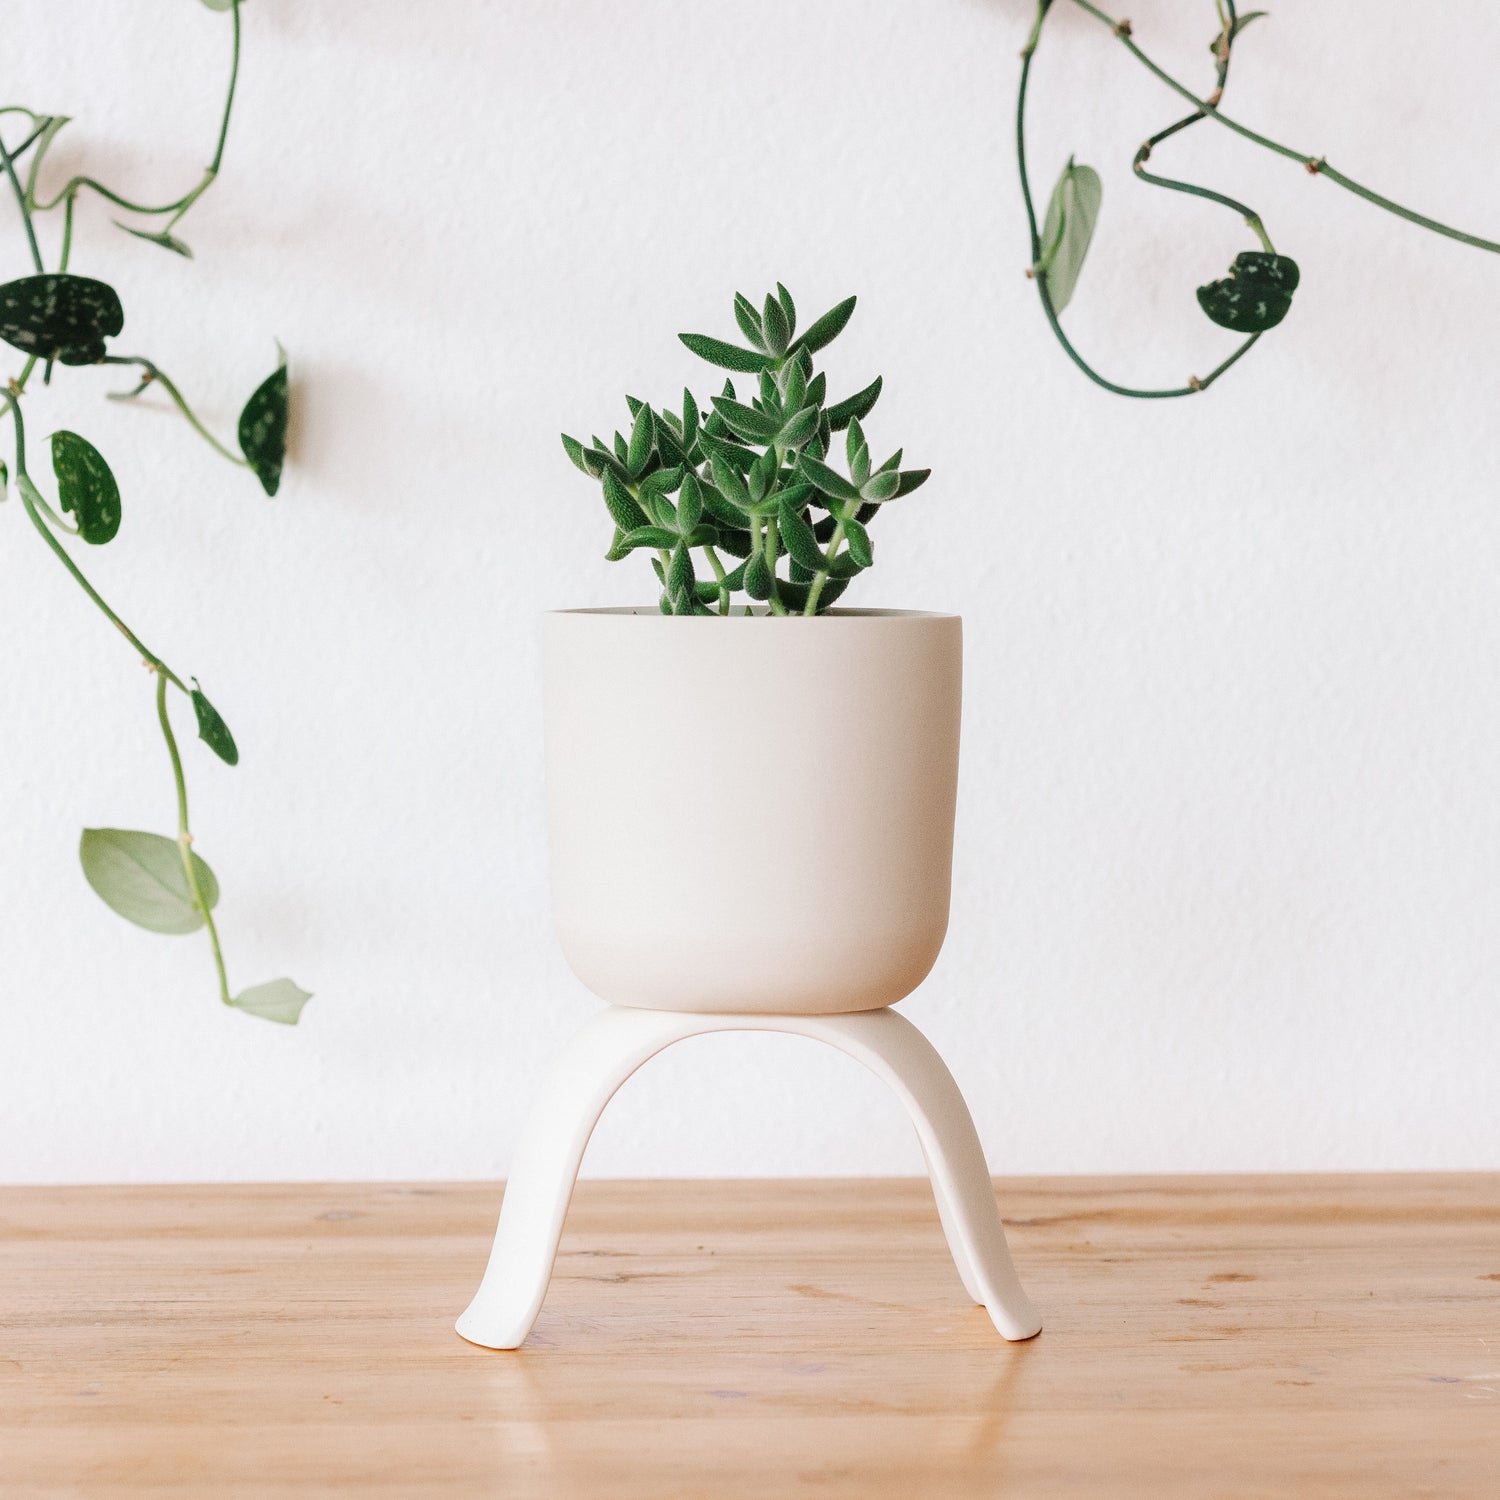 Give your plants a little lift - or use these porcelain planters as functional decor to hold candles, jewelry, as a catchall or in the kitchen.